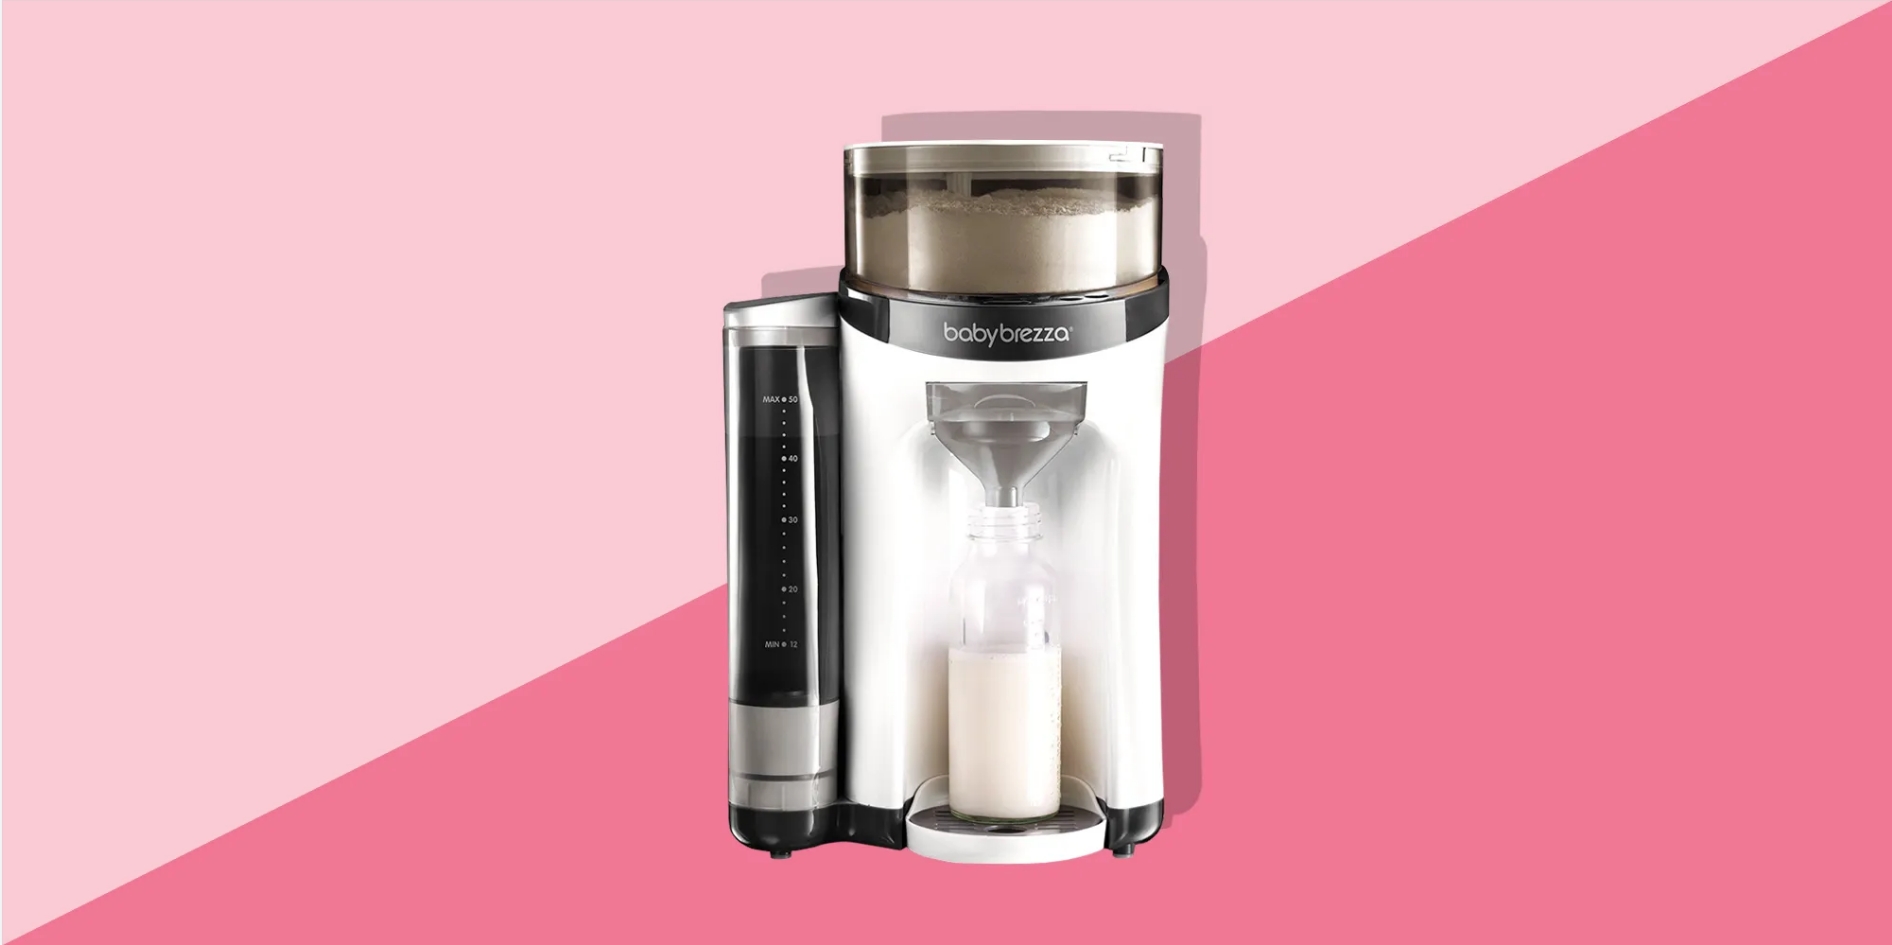 THE BEST BABY FORMULA MAKER IN THE MARKET TODAY